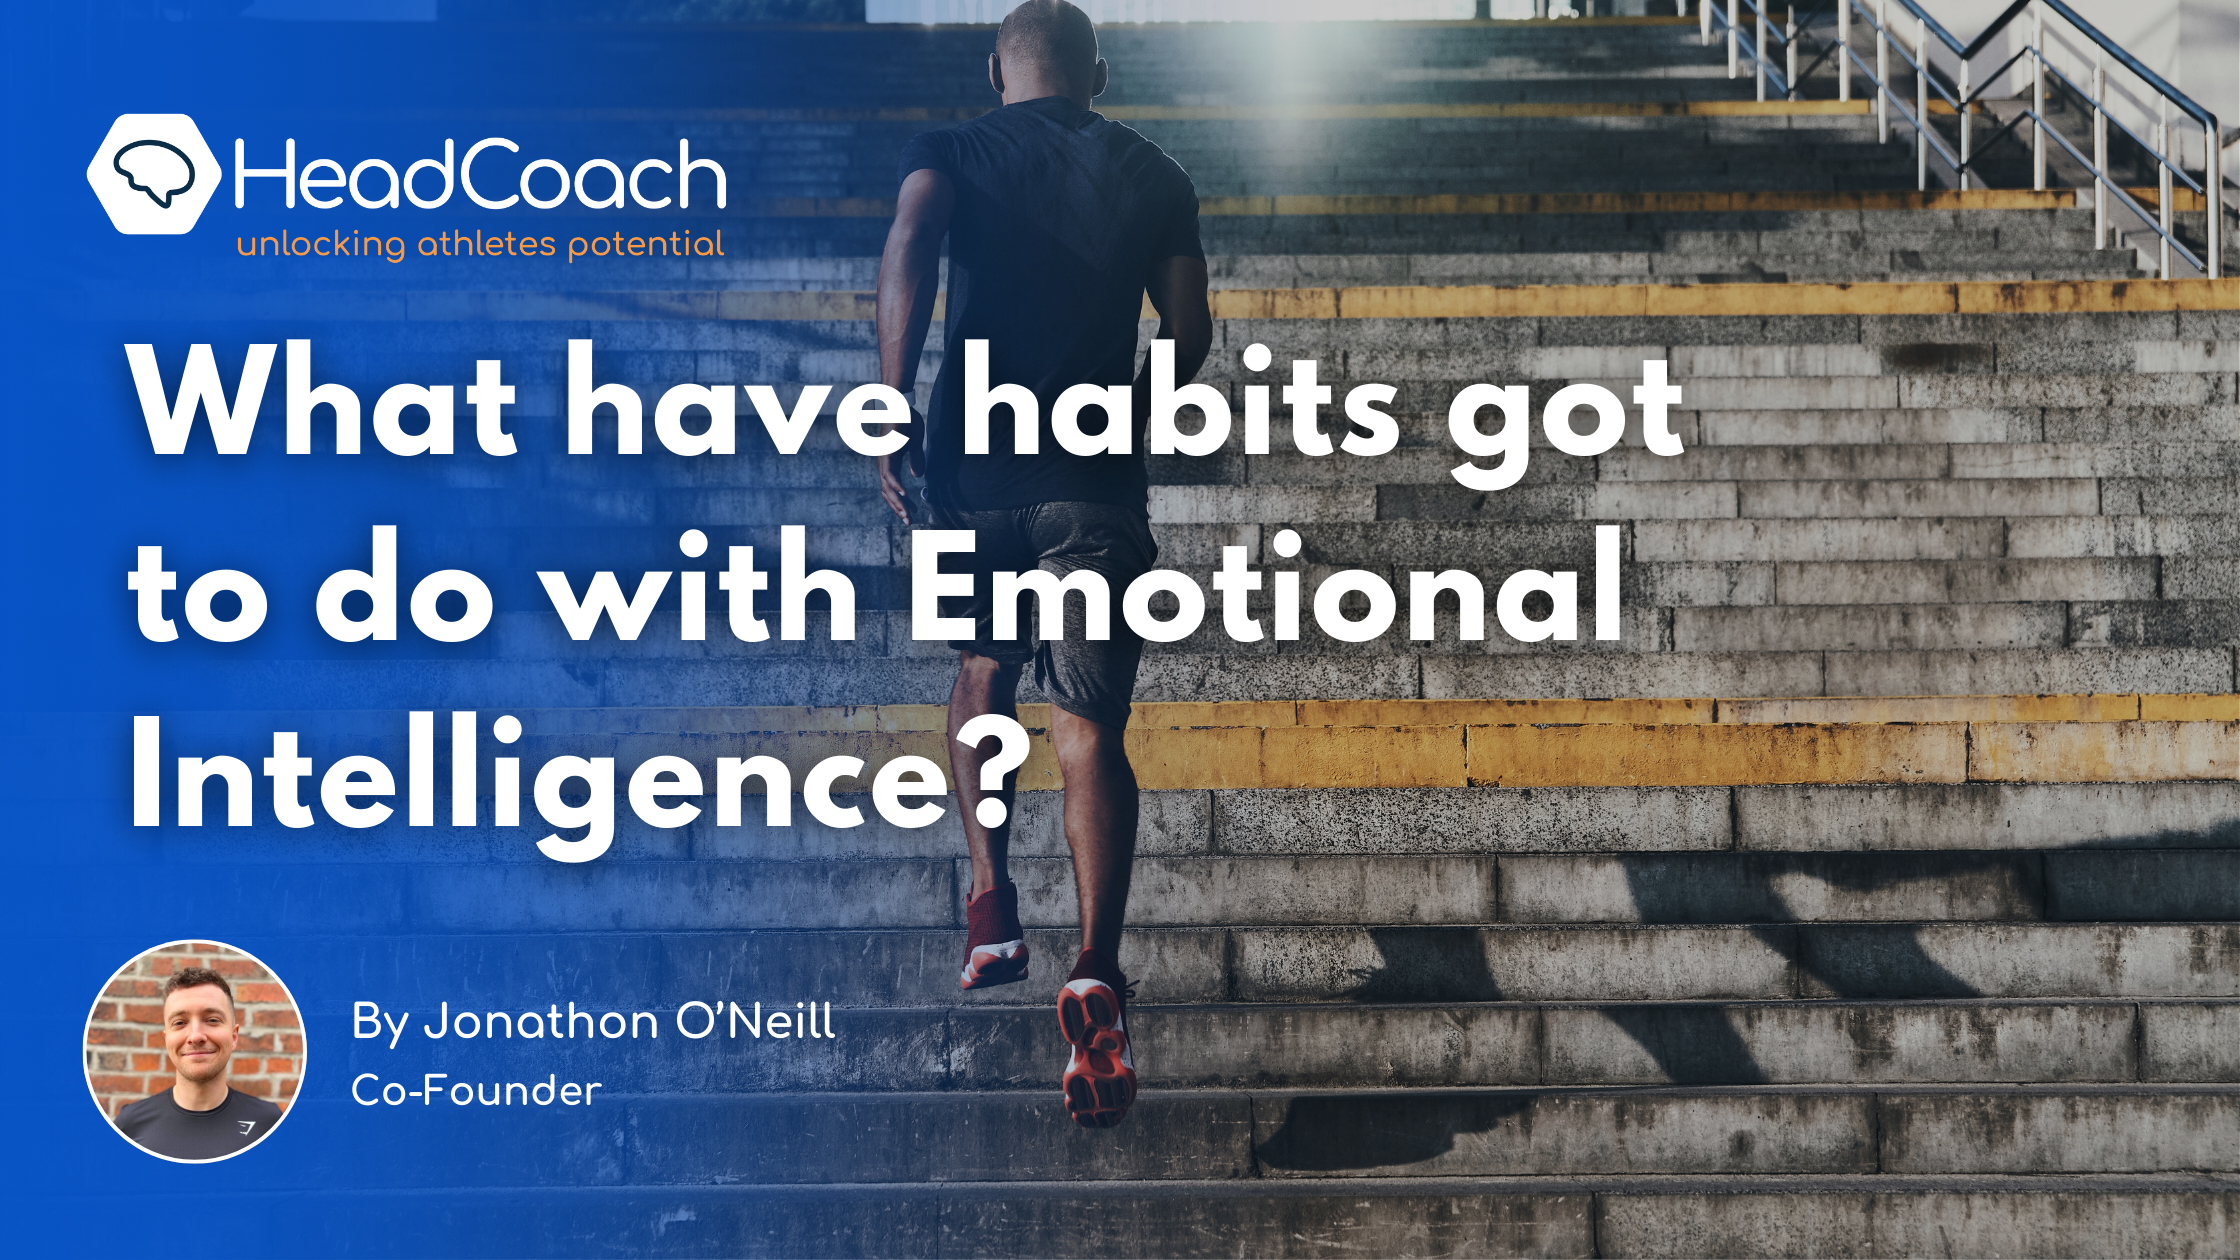 What have habits got to do with Emotional Intelligence?